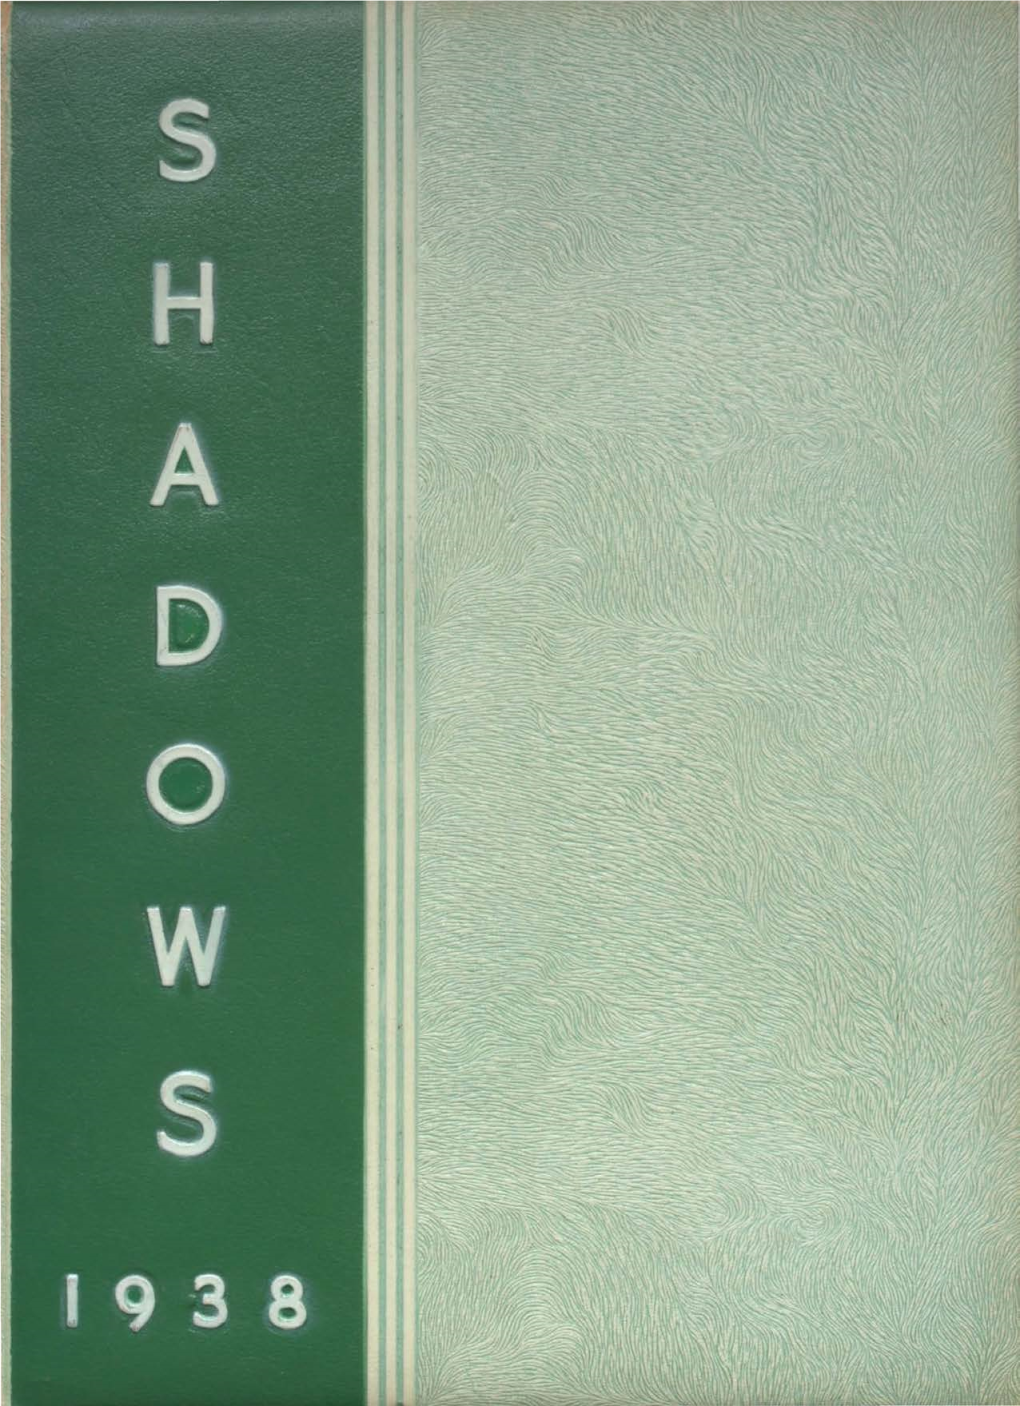 1938 “ Shadows" Has Endeavored to Produce an Improved and Different Type of Yearbook